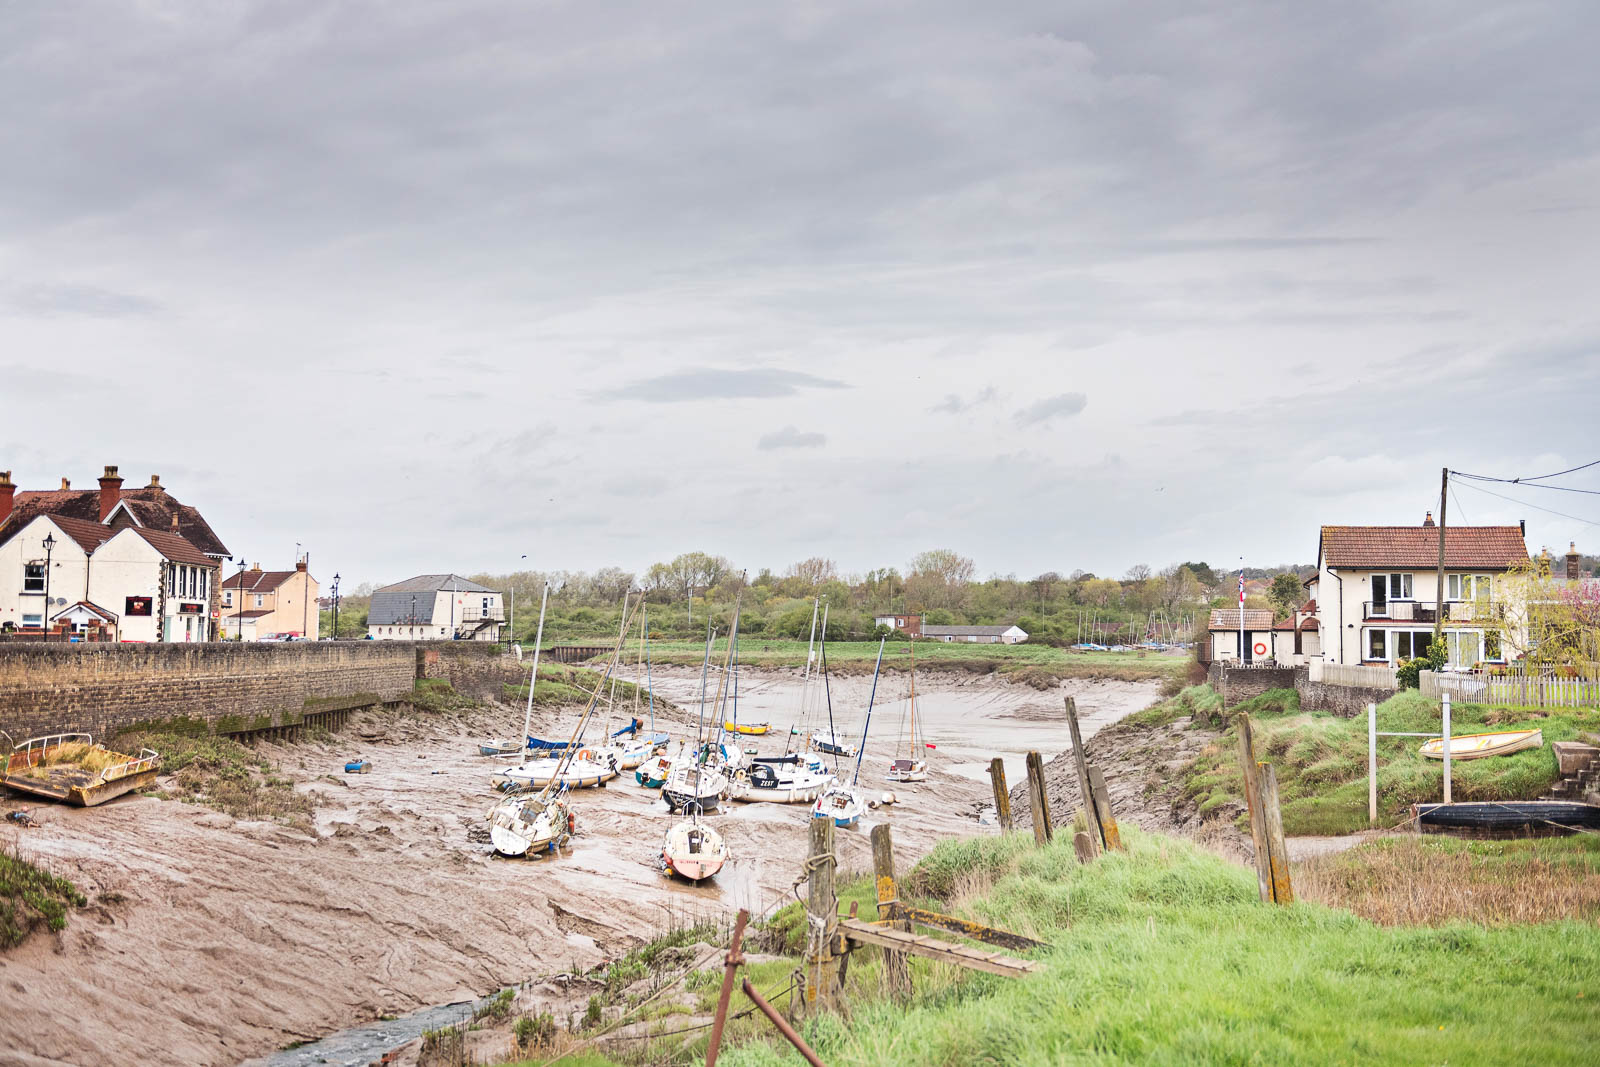 Photo of the village of Pil. With the tide receded, small boats sit awkwardly on the silt riverbank 